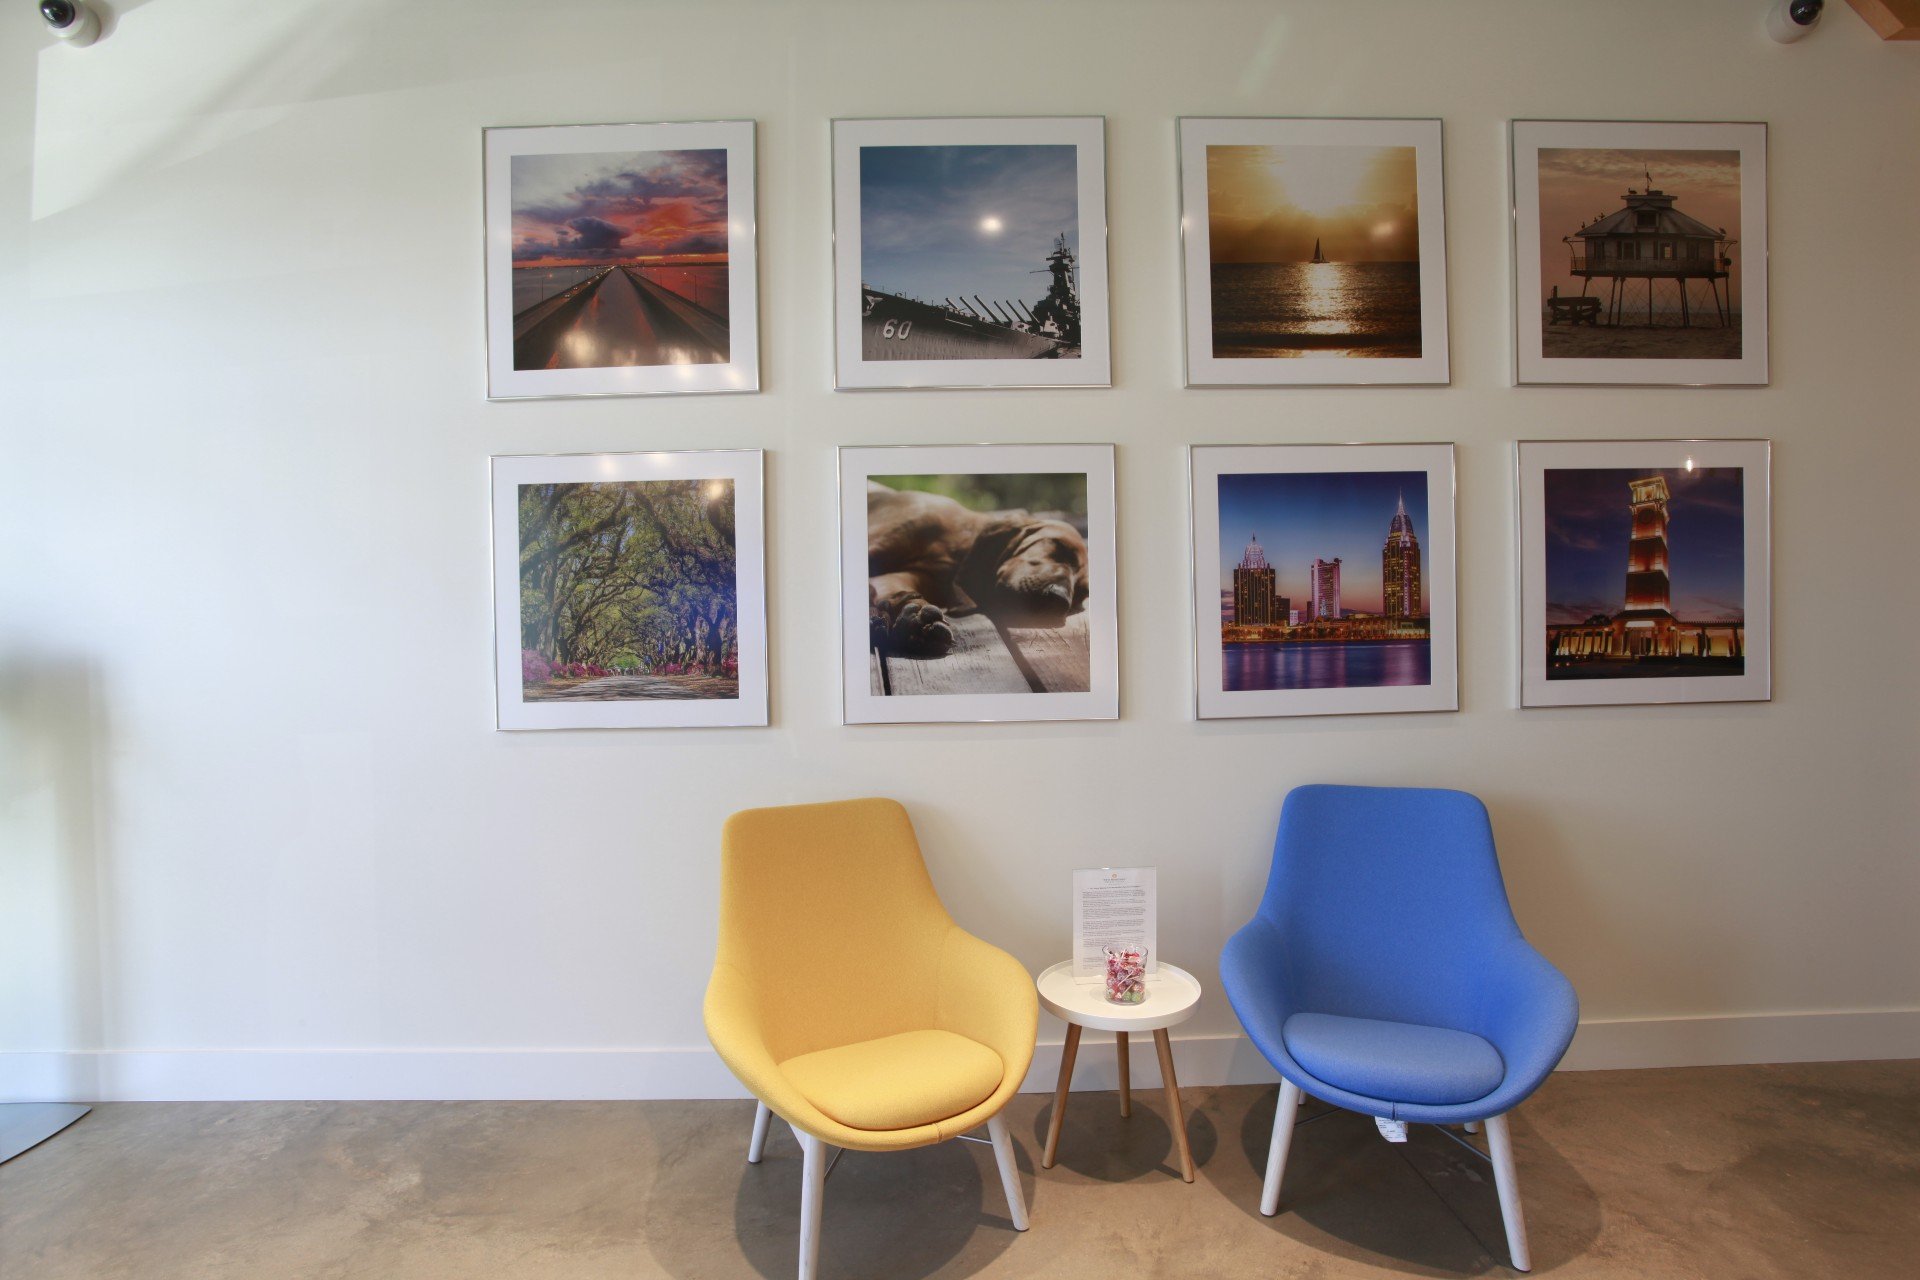 A white wall in the New Horizons lobby features two rows of framed photographs of local and oceanside scenes. Two chairs, one yellow and one blue, sit in front of the photographs with a small, round white table between them holding a jar of lollipops.